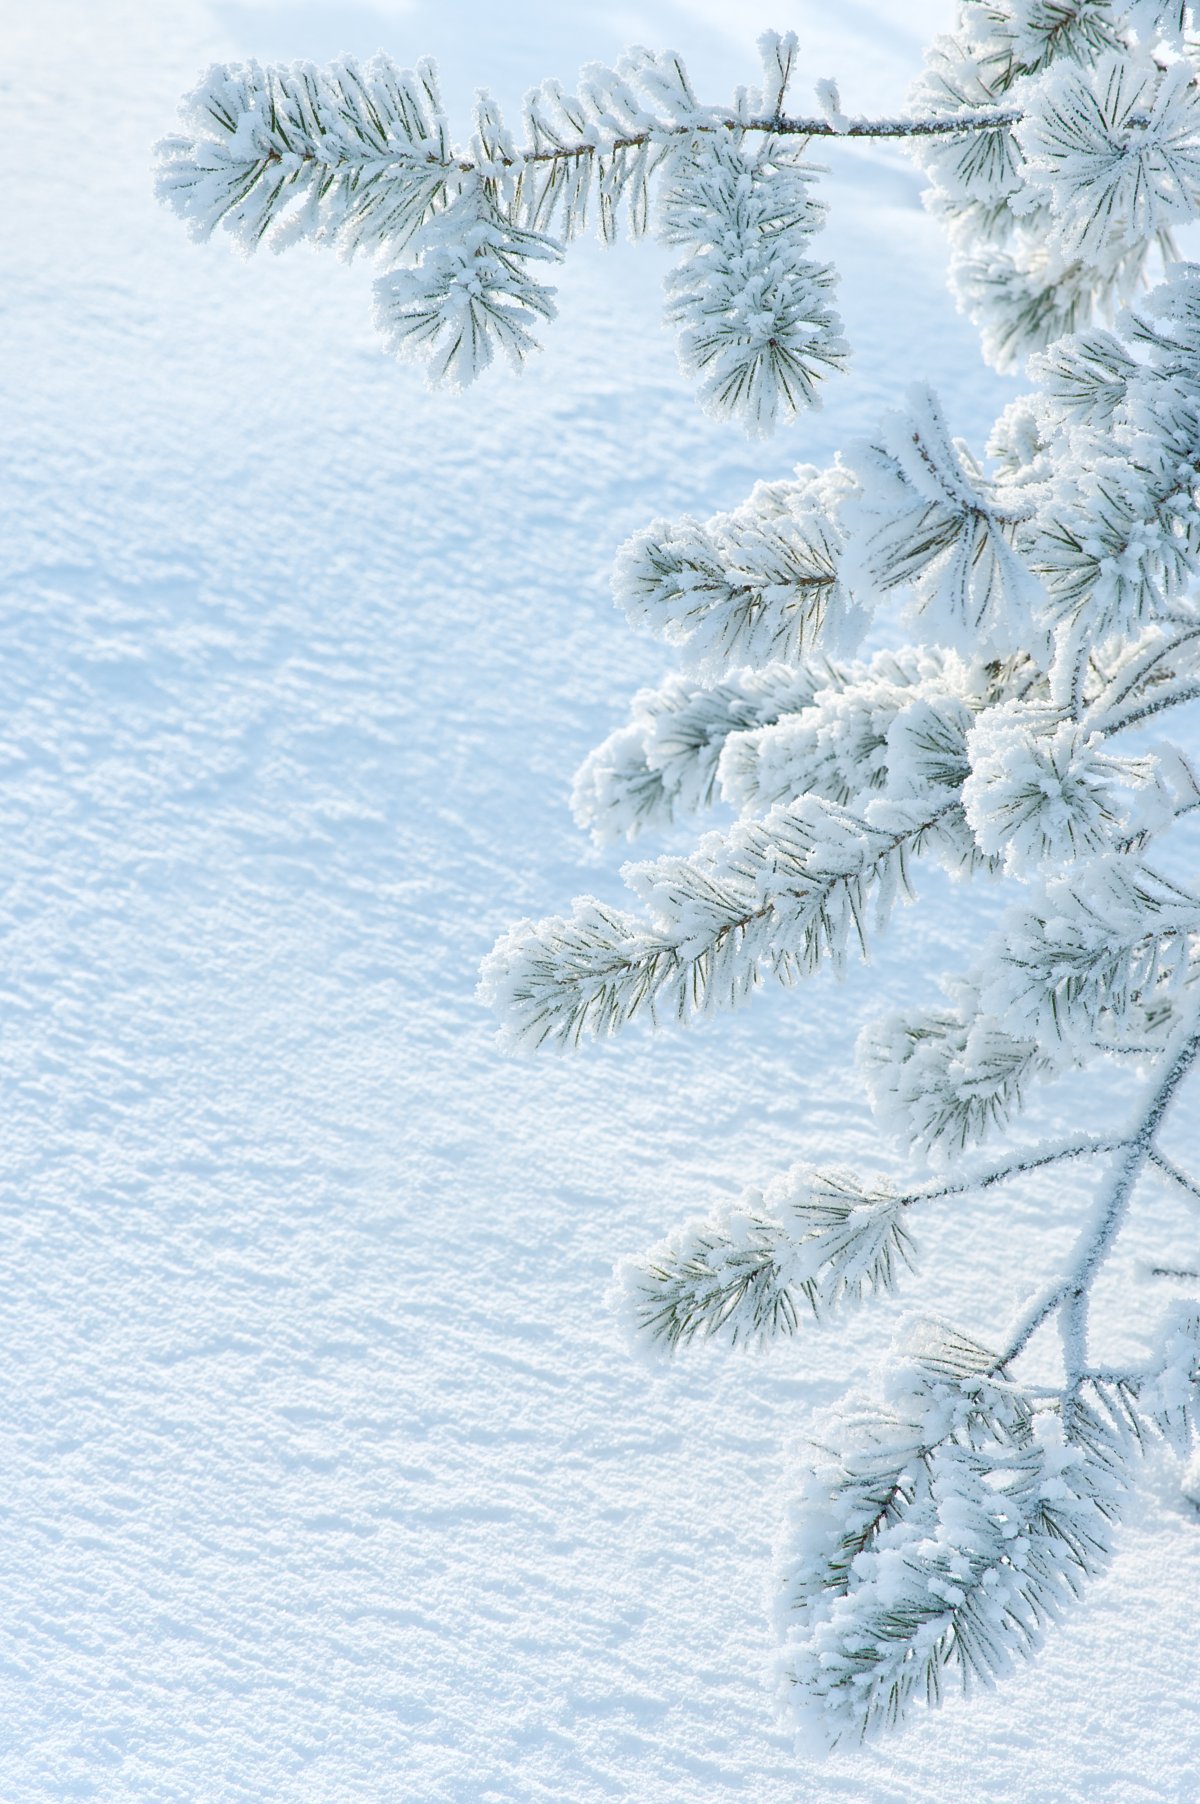 HD pictures of pine trees and snow